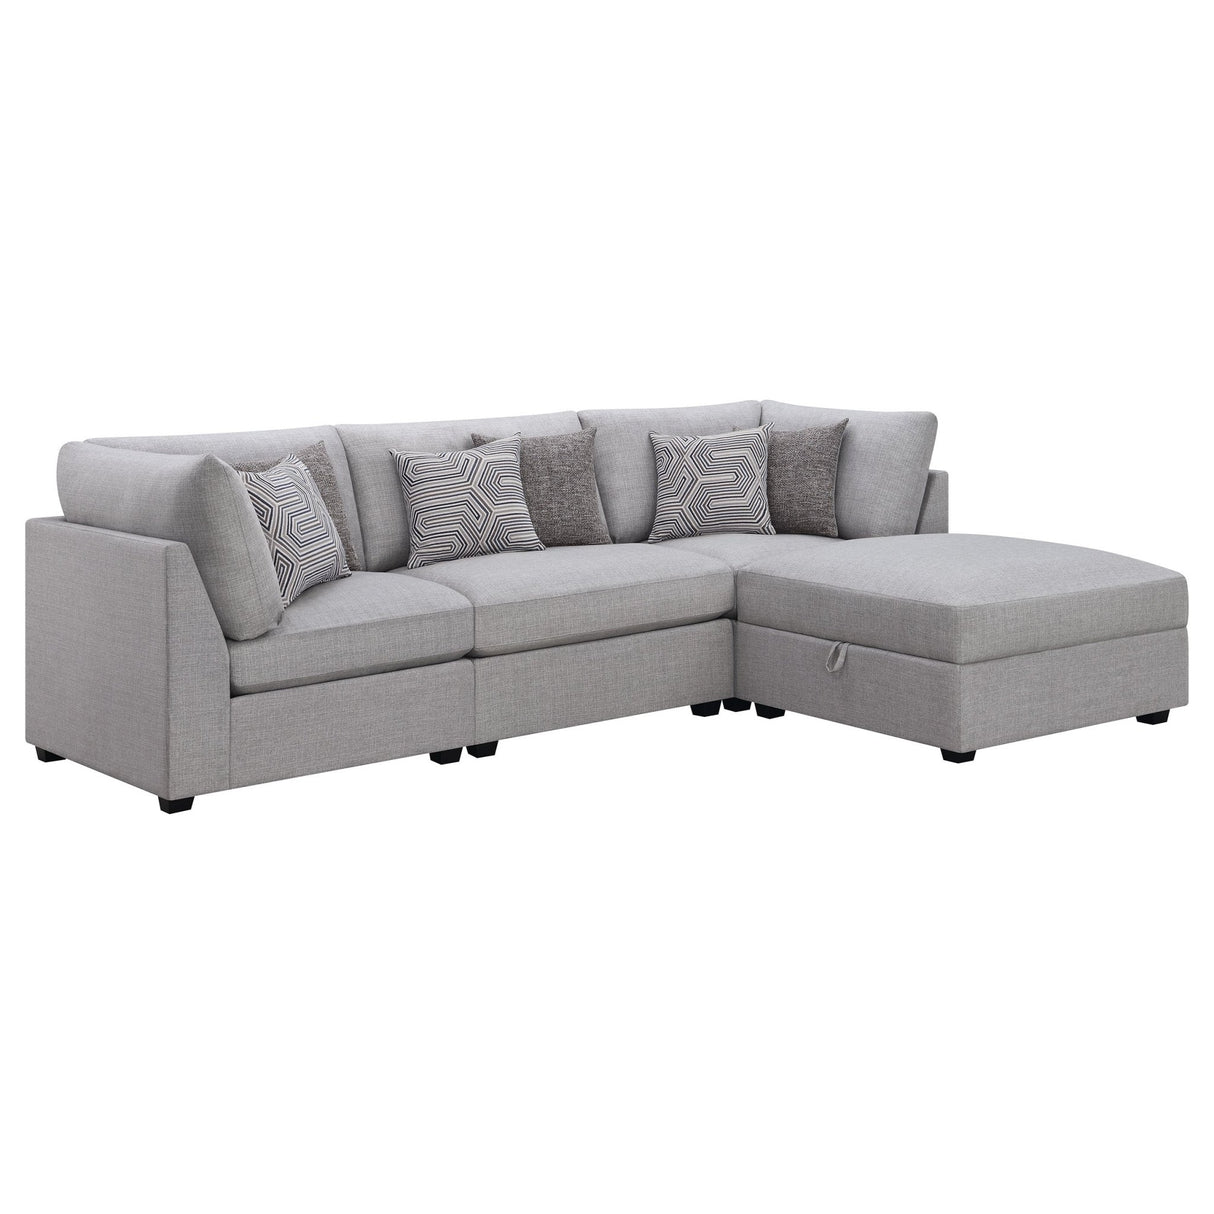 4 Pc Sectional - Cambria 4-piece Upholstered Modular Sectional Grey